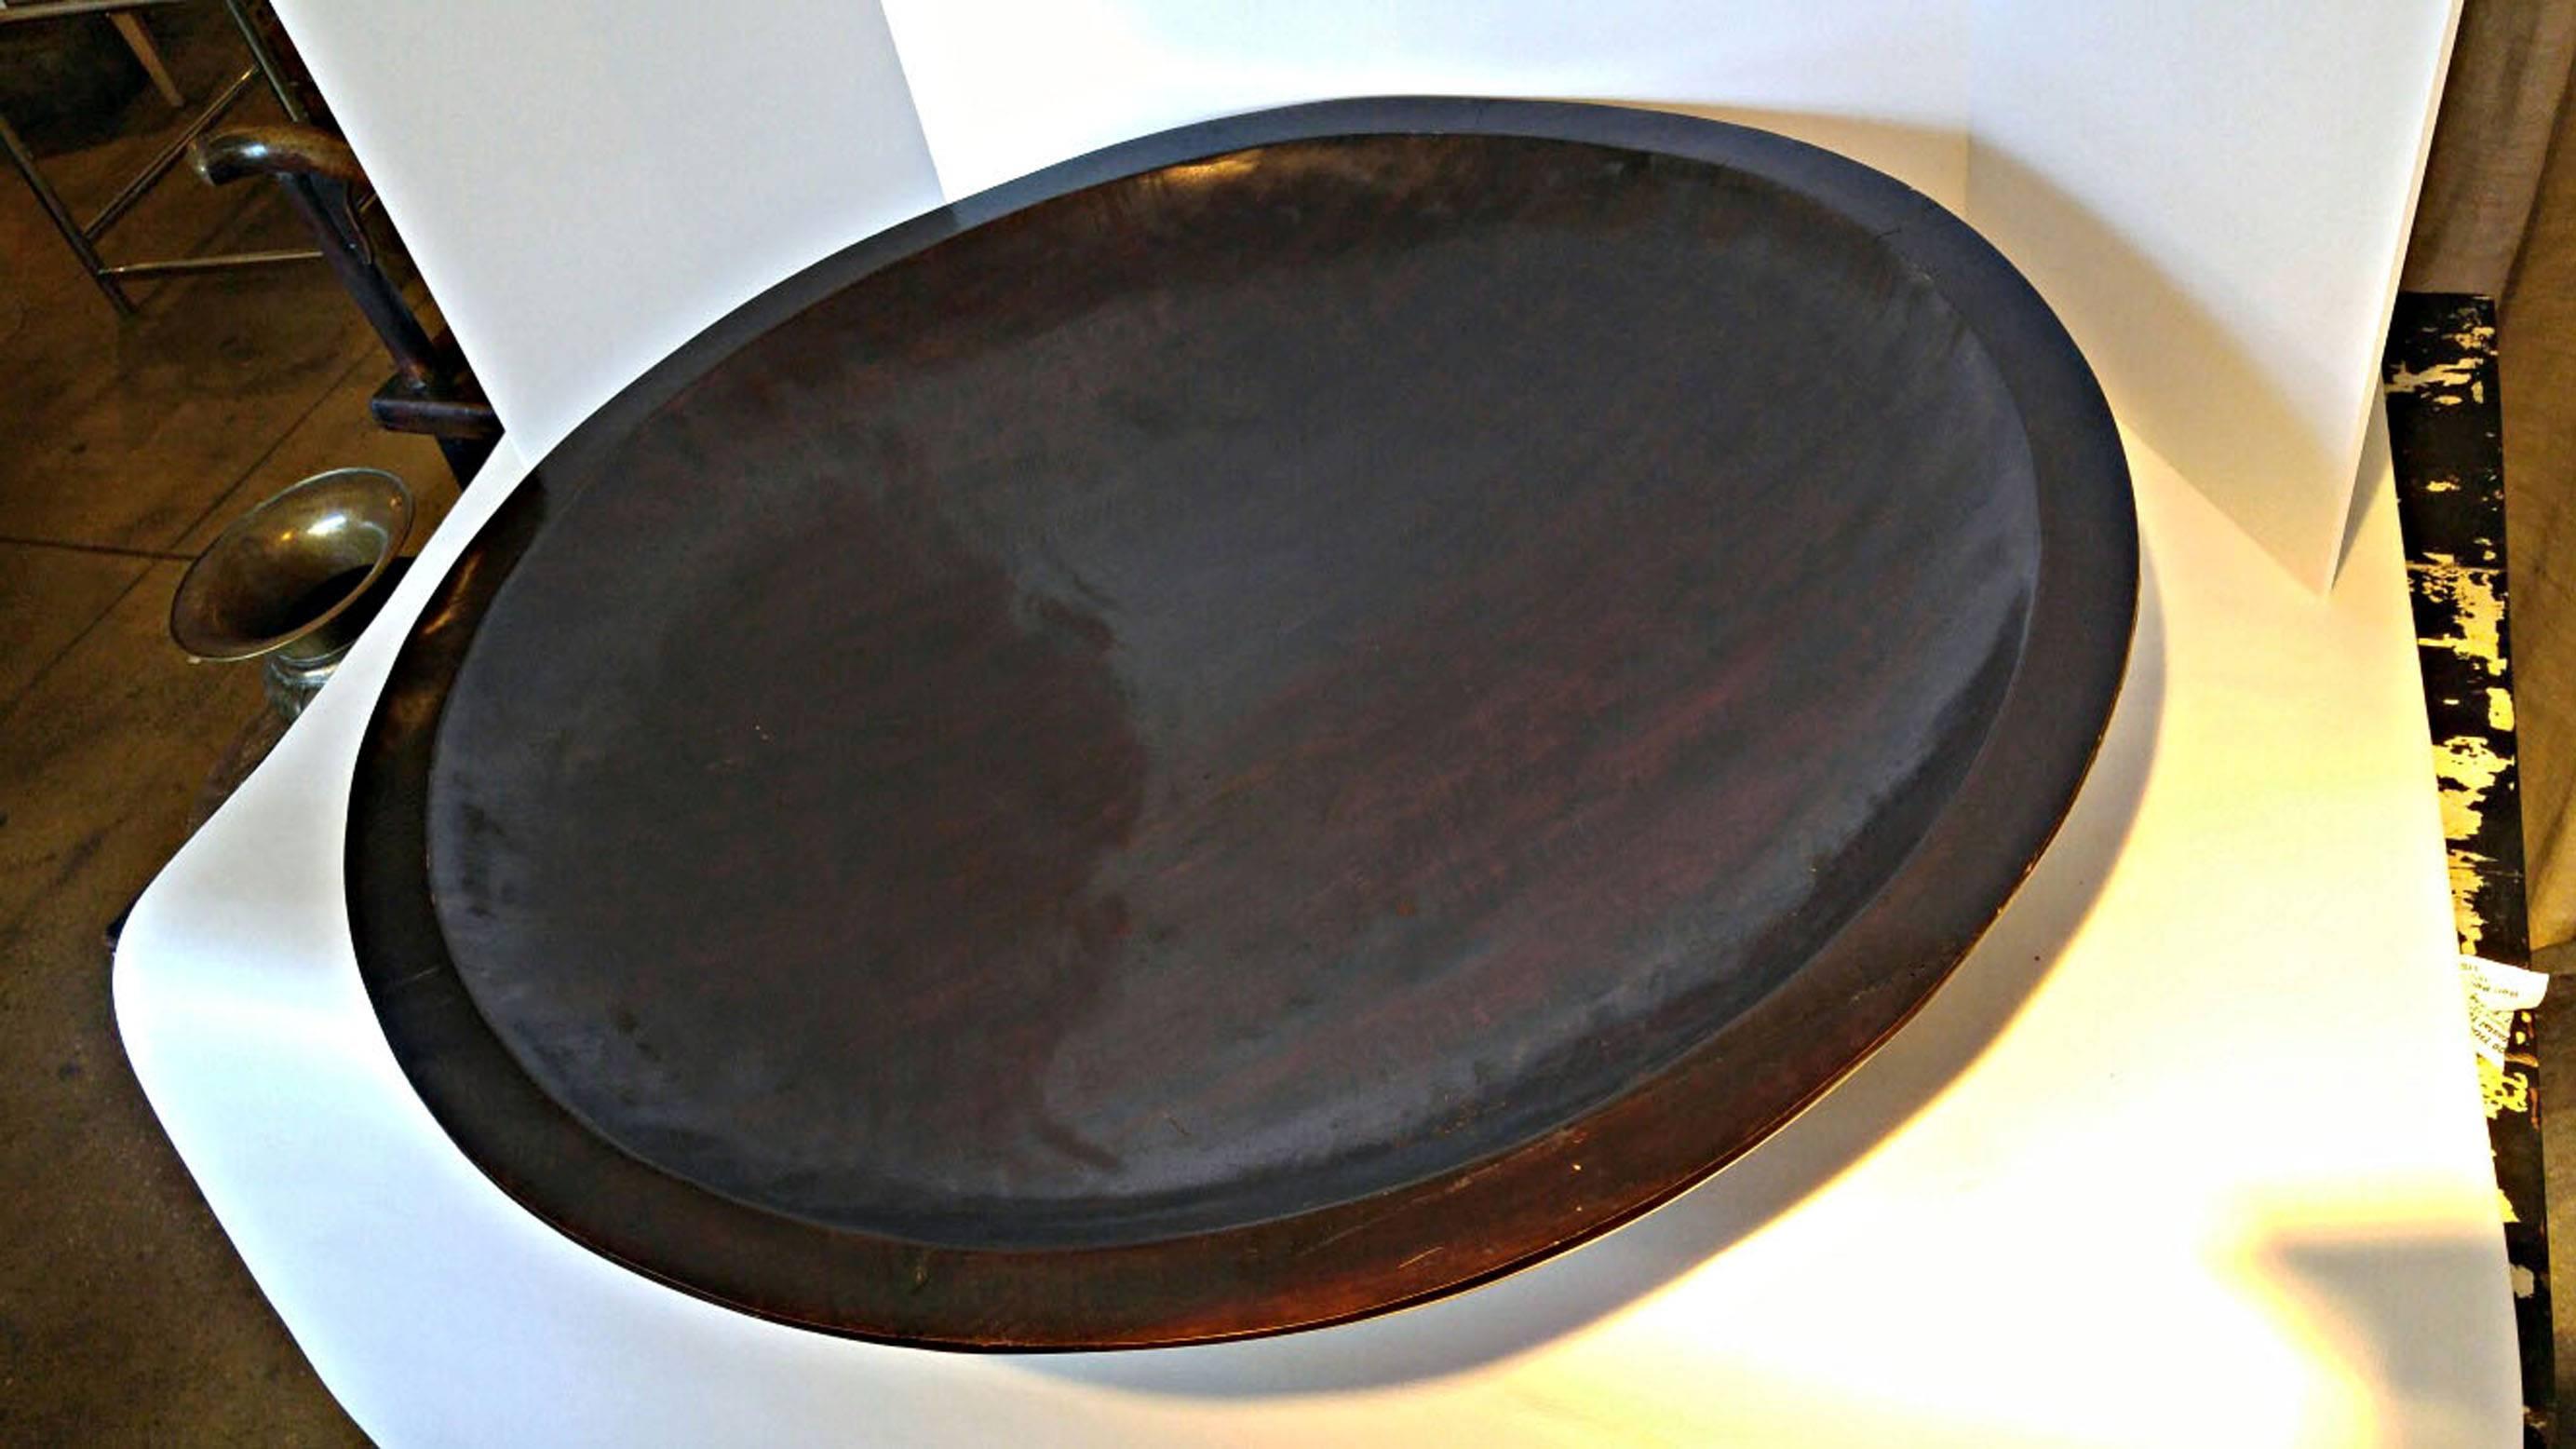 A large lacquered mahogany server, bowl, or centrepiece in a dark finish from Indonesia.